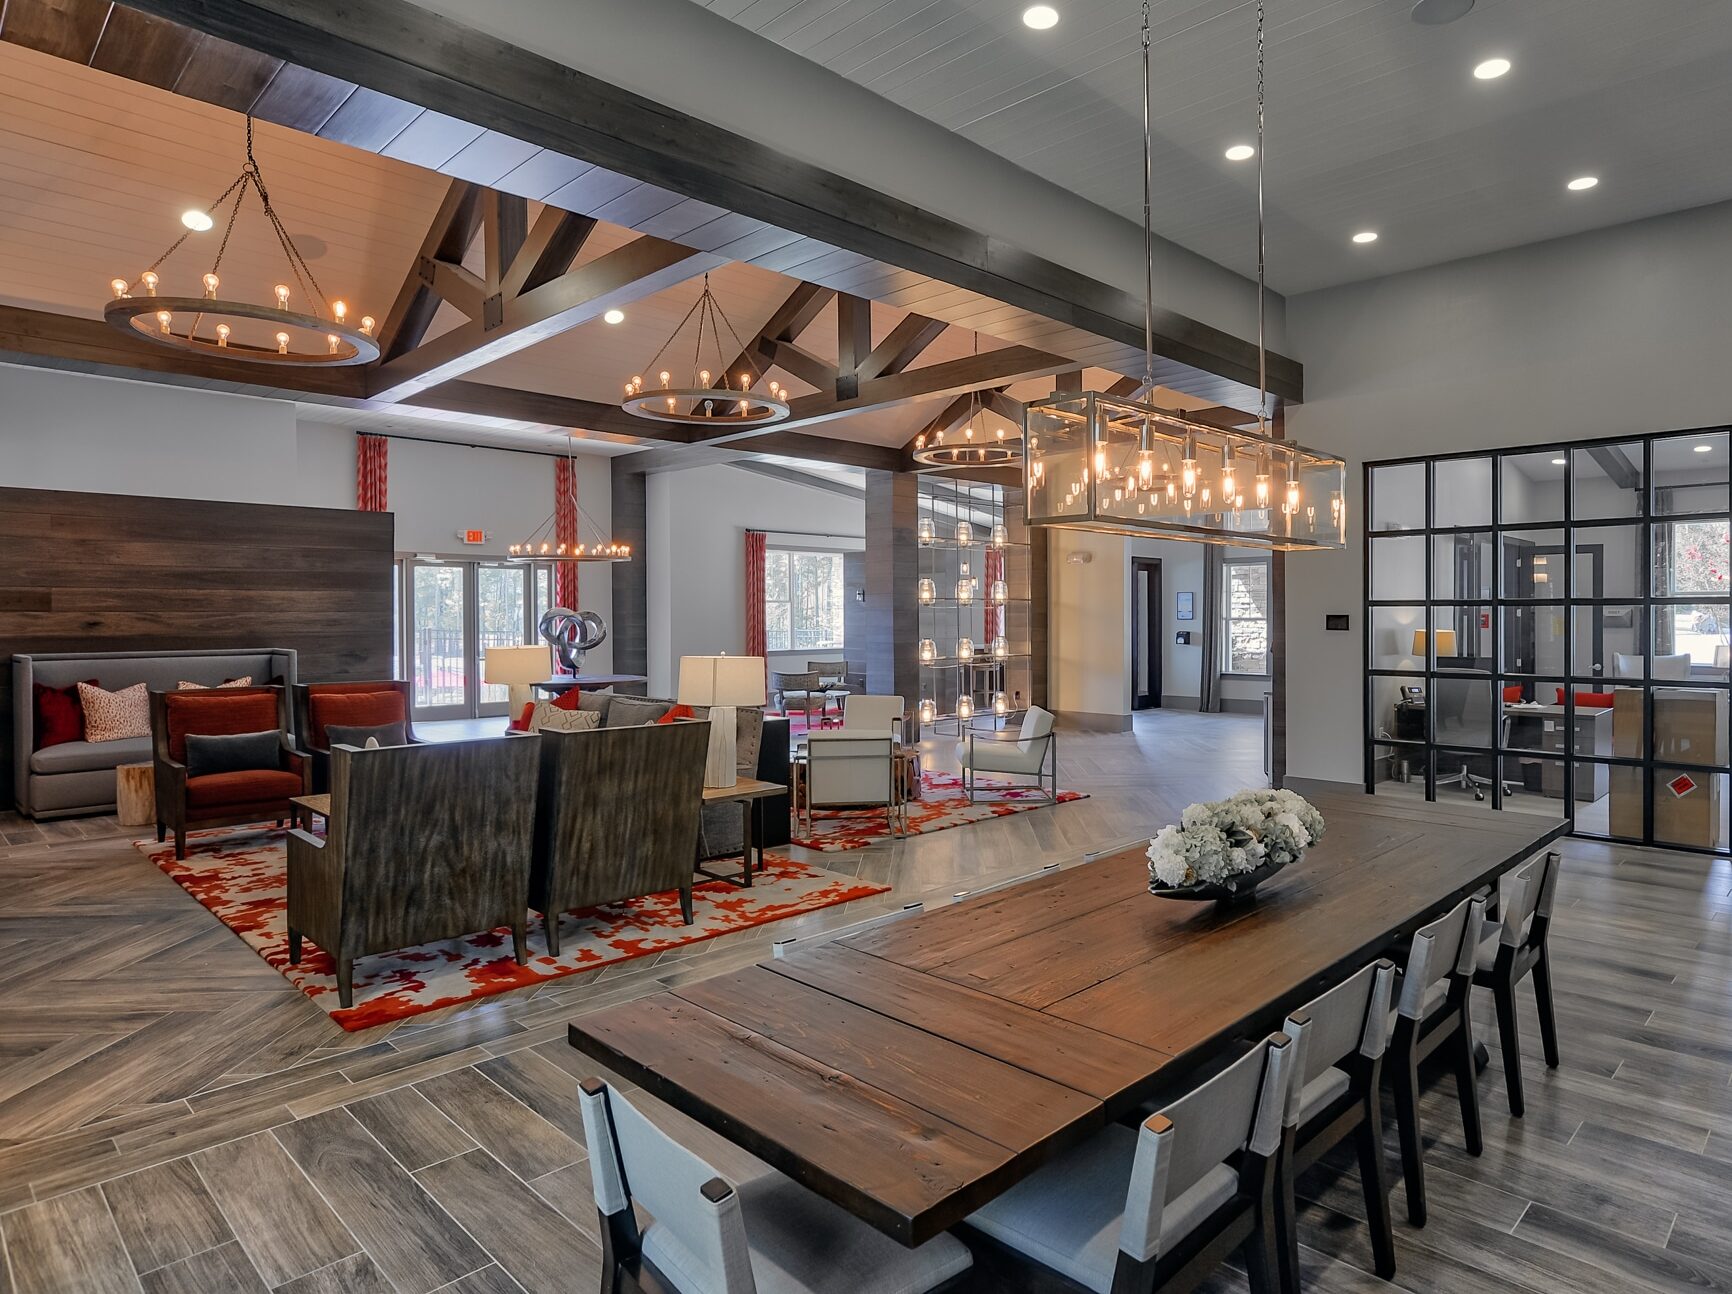 Image shows view of the public room at Lodge at Croasdaile Farm Apartments in Durham, NC by architectural photographer Bruce Johnson